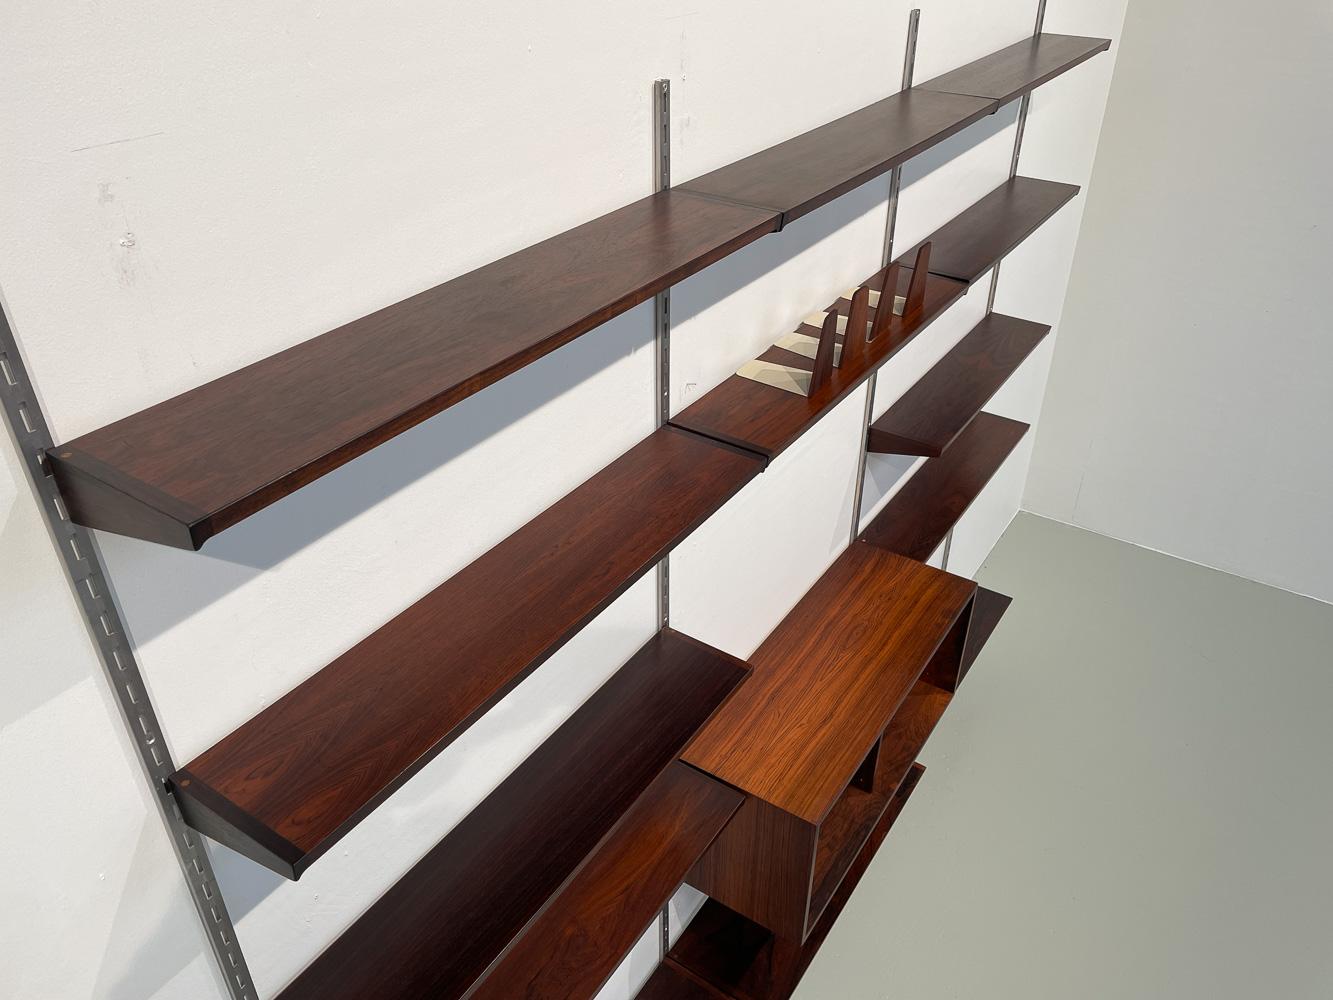 Vintage Danish Rosewood 3-Bay Wall Unit by Kai Kristiansen for FM, 1960s In Good Condition For Sale In Asaa, DK